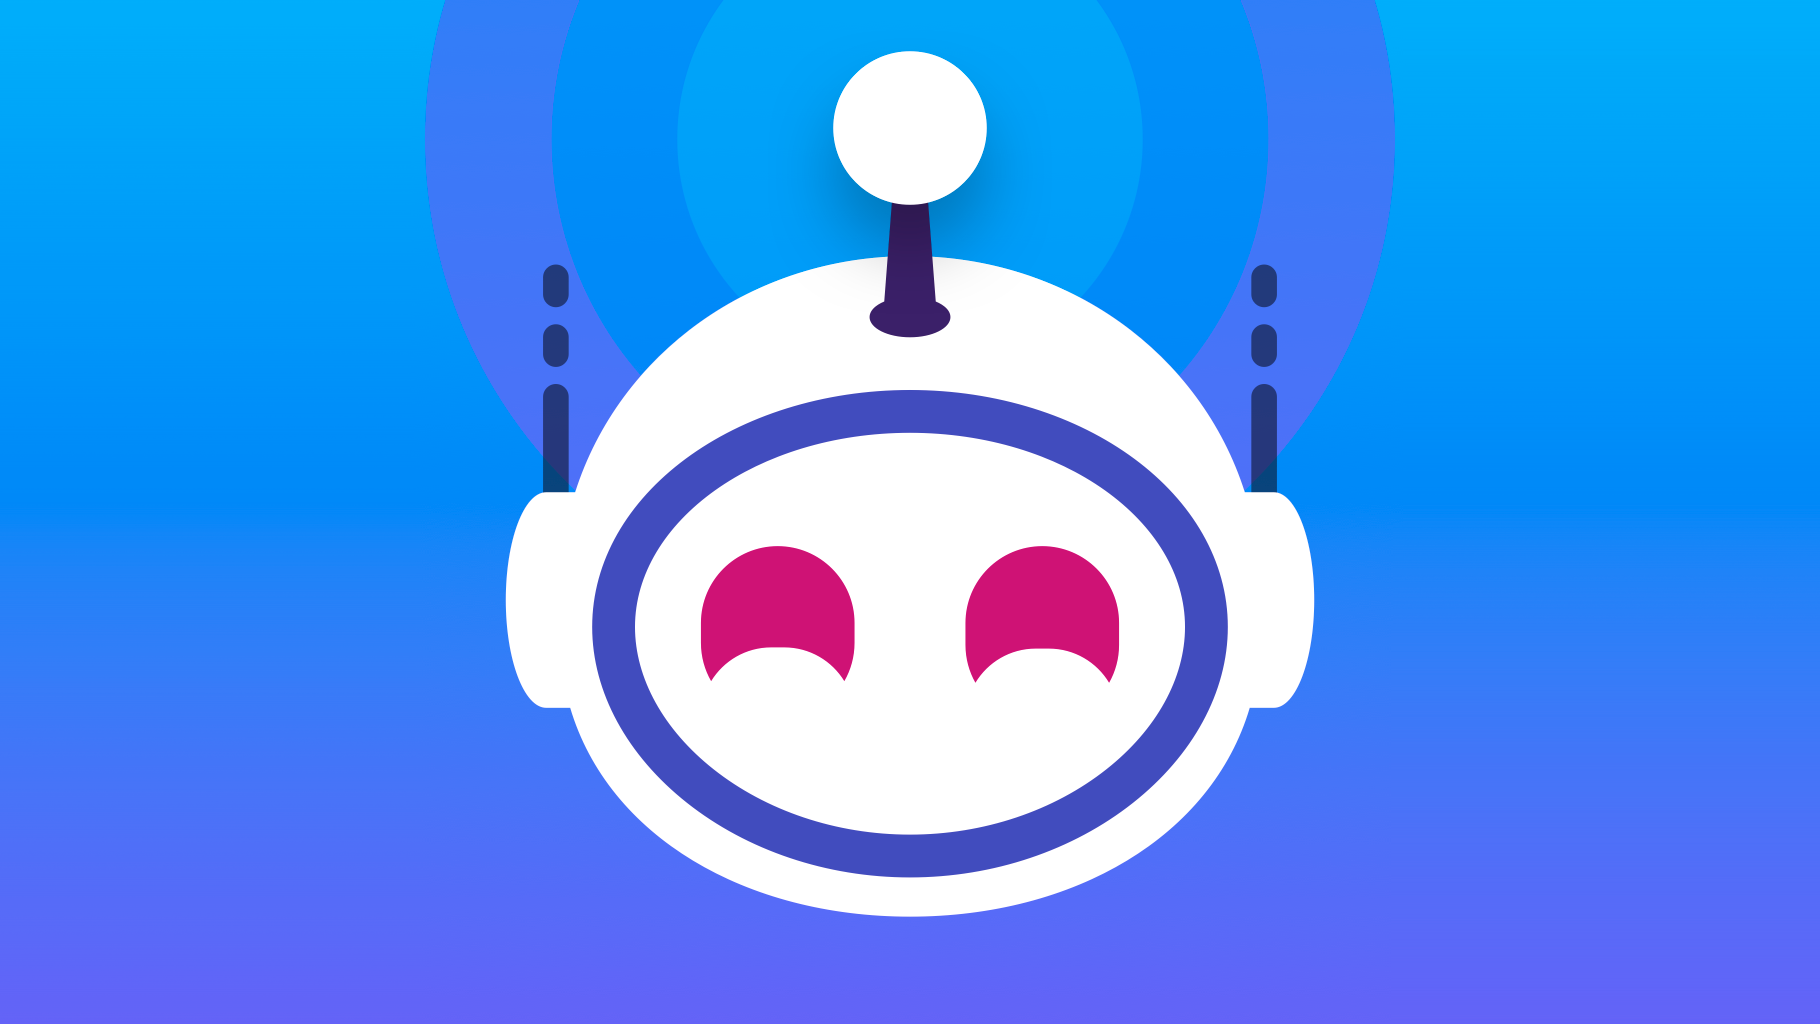 Popular Reddit app Apollo might not be able to operate as is in the future due to planned API pricing that Reddit is implementing. 
Apollo developer 